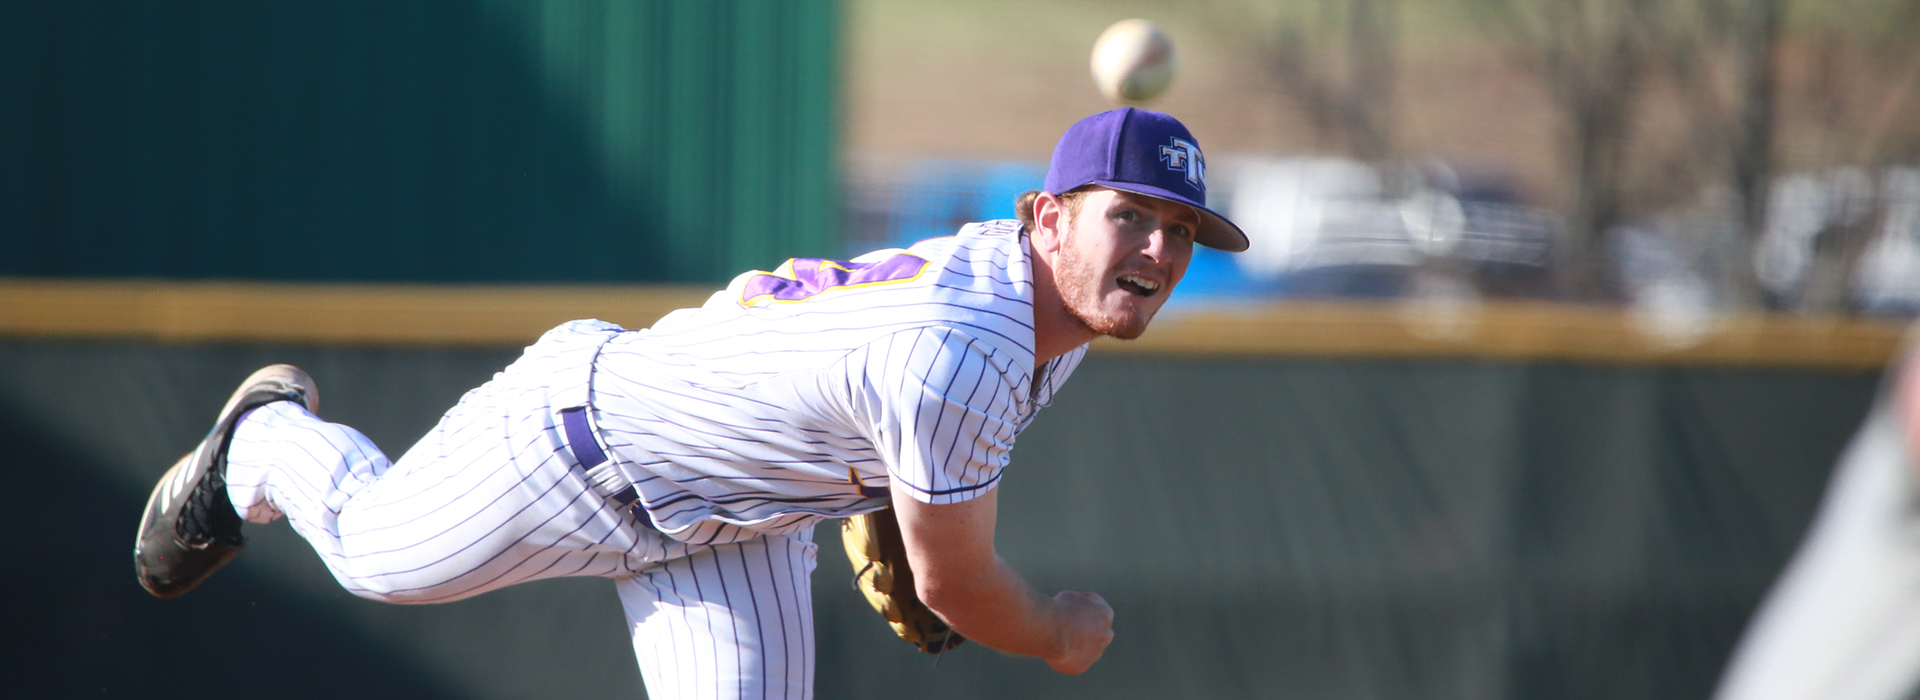 Pitching backs up strong offensive showing in Tech's 10-5 win over Lipscomb